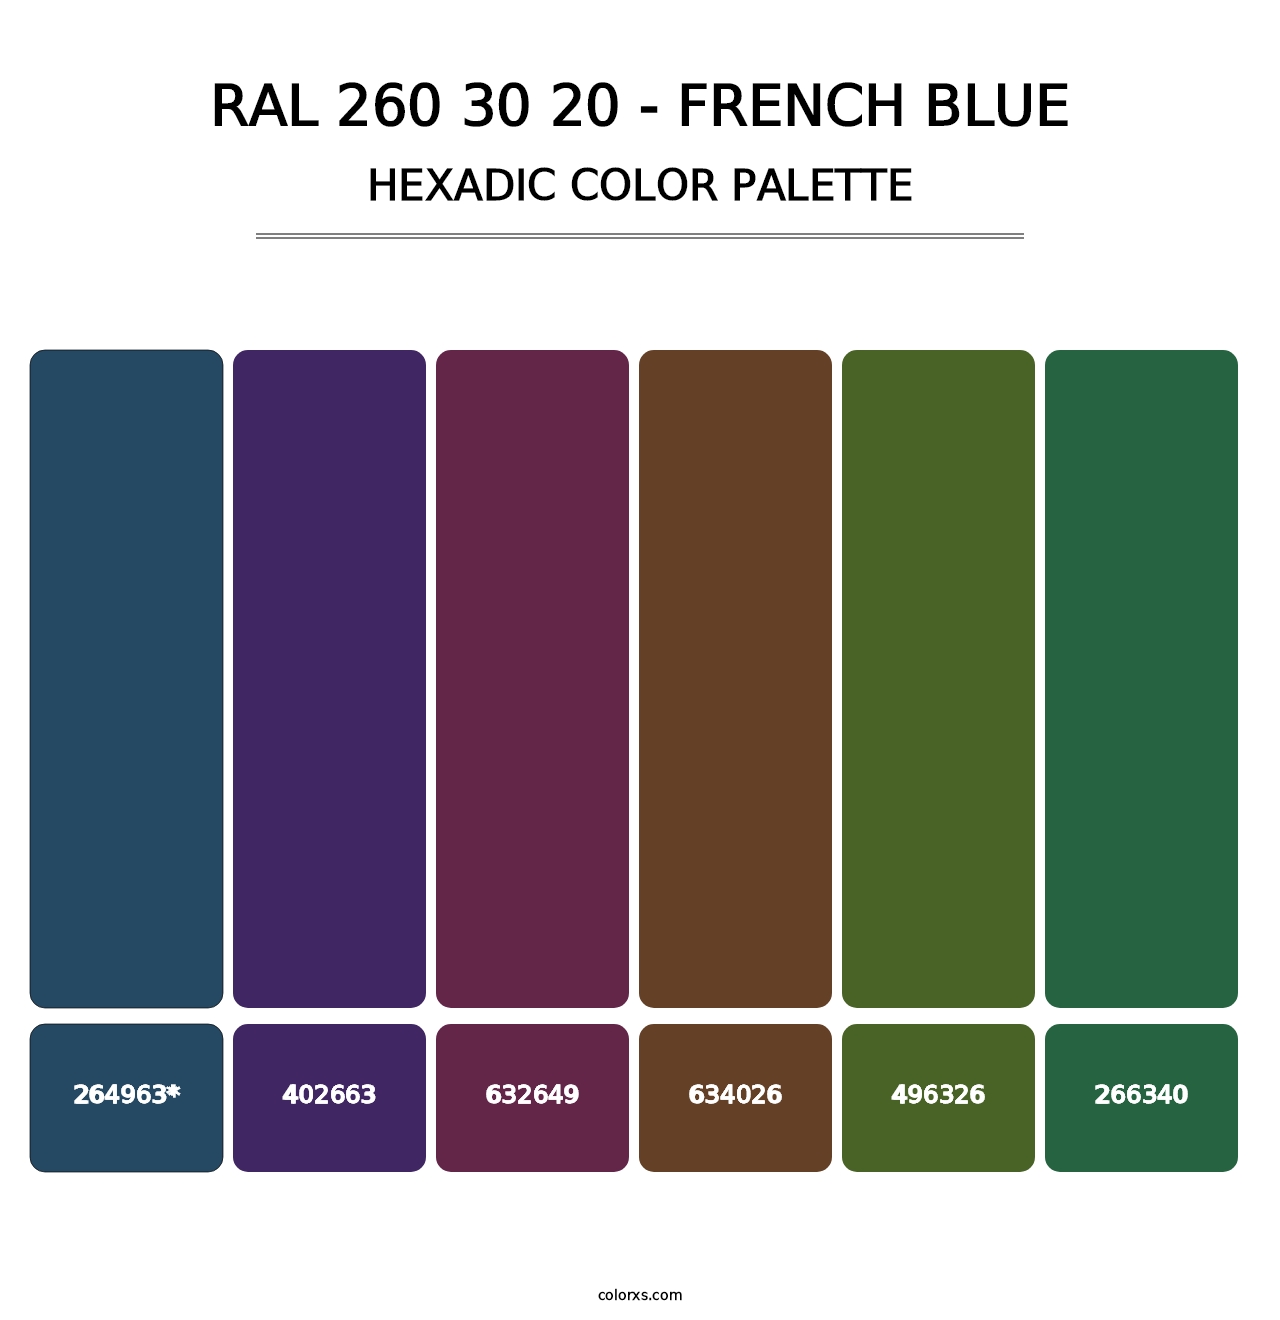 RAL 260 30 20 - French Blue - Hexadic Color Palette